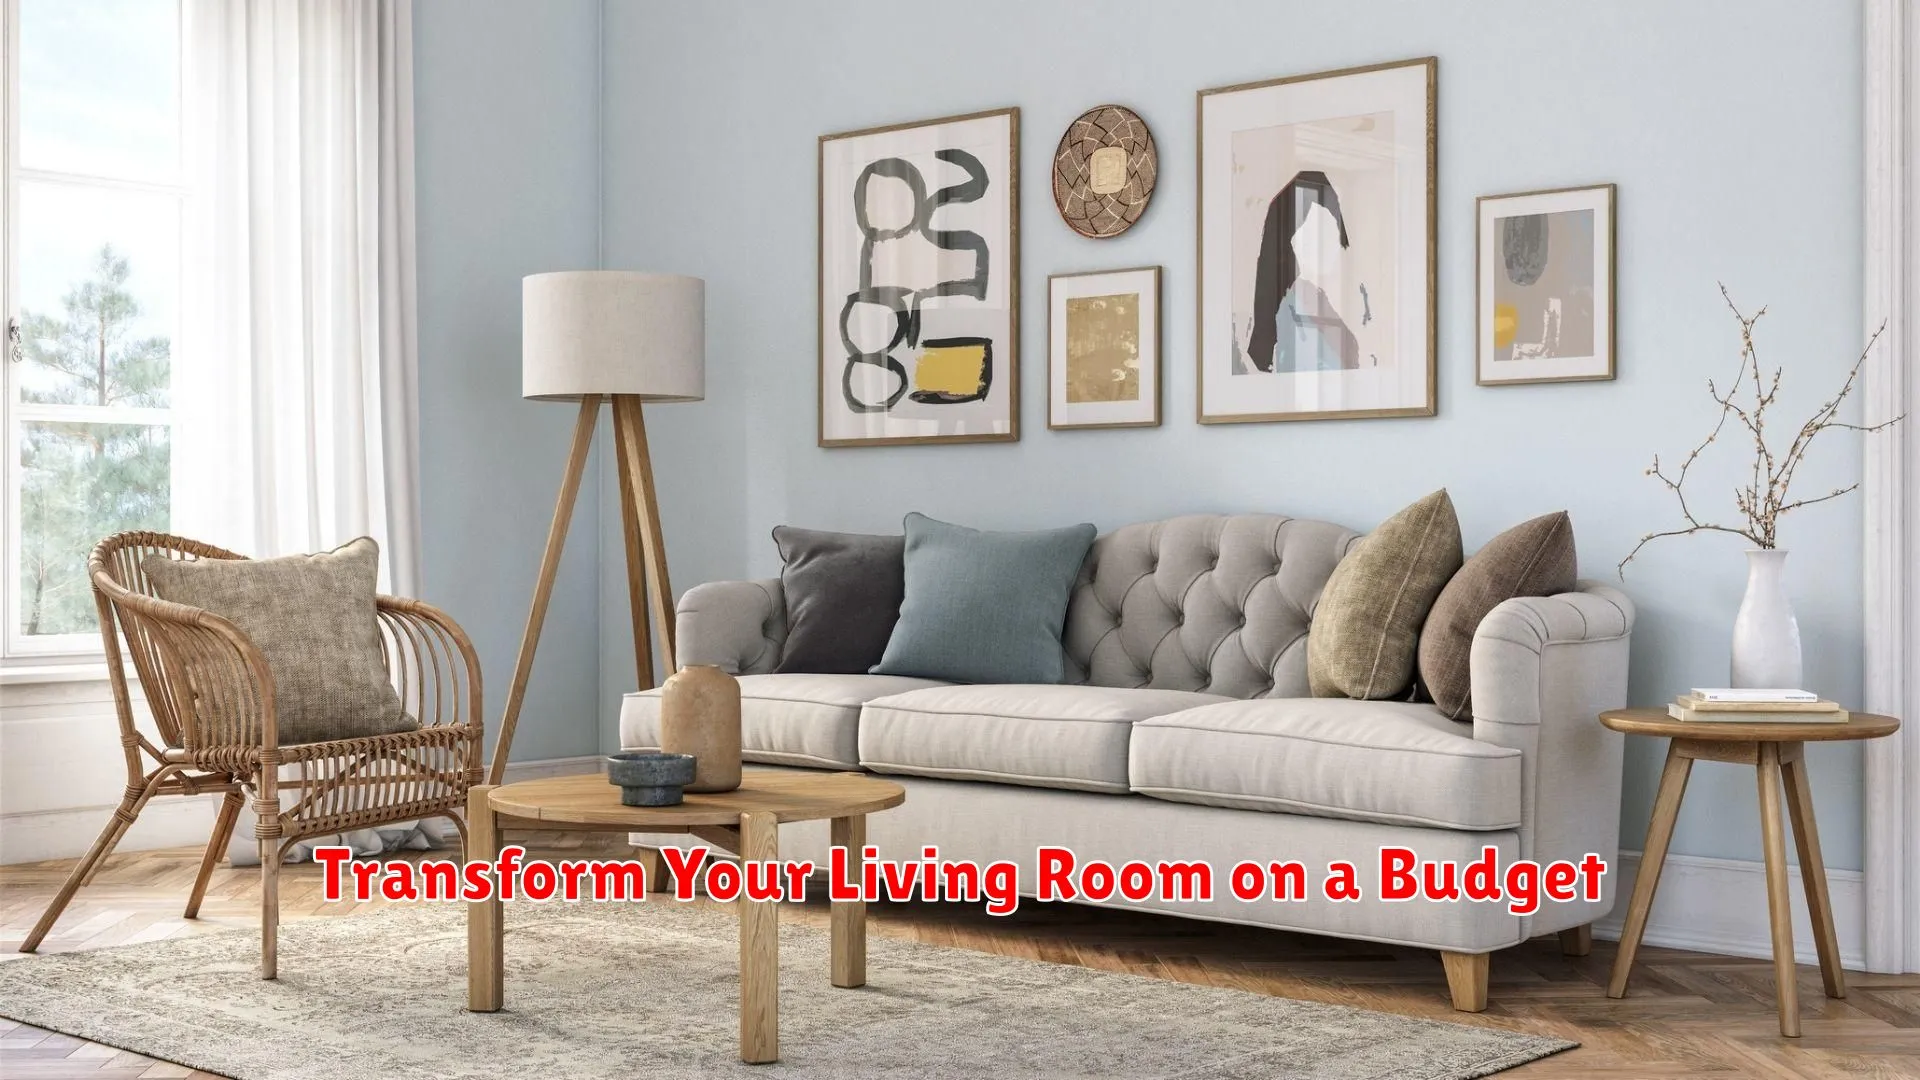 Transform Your Living Room on a Budget